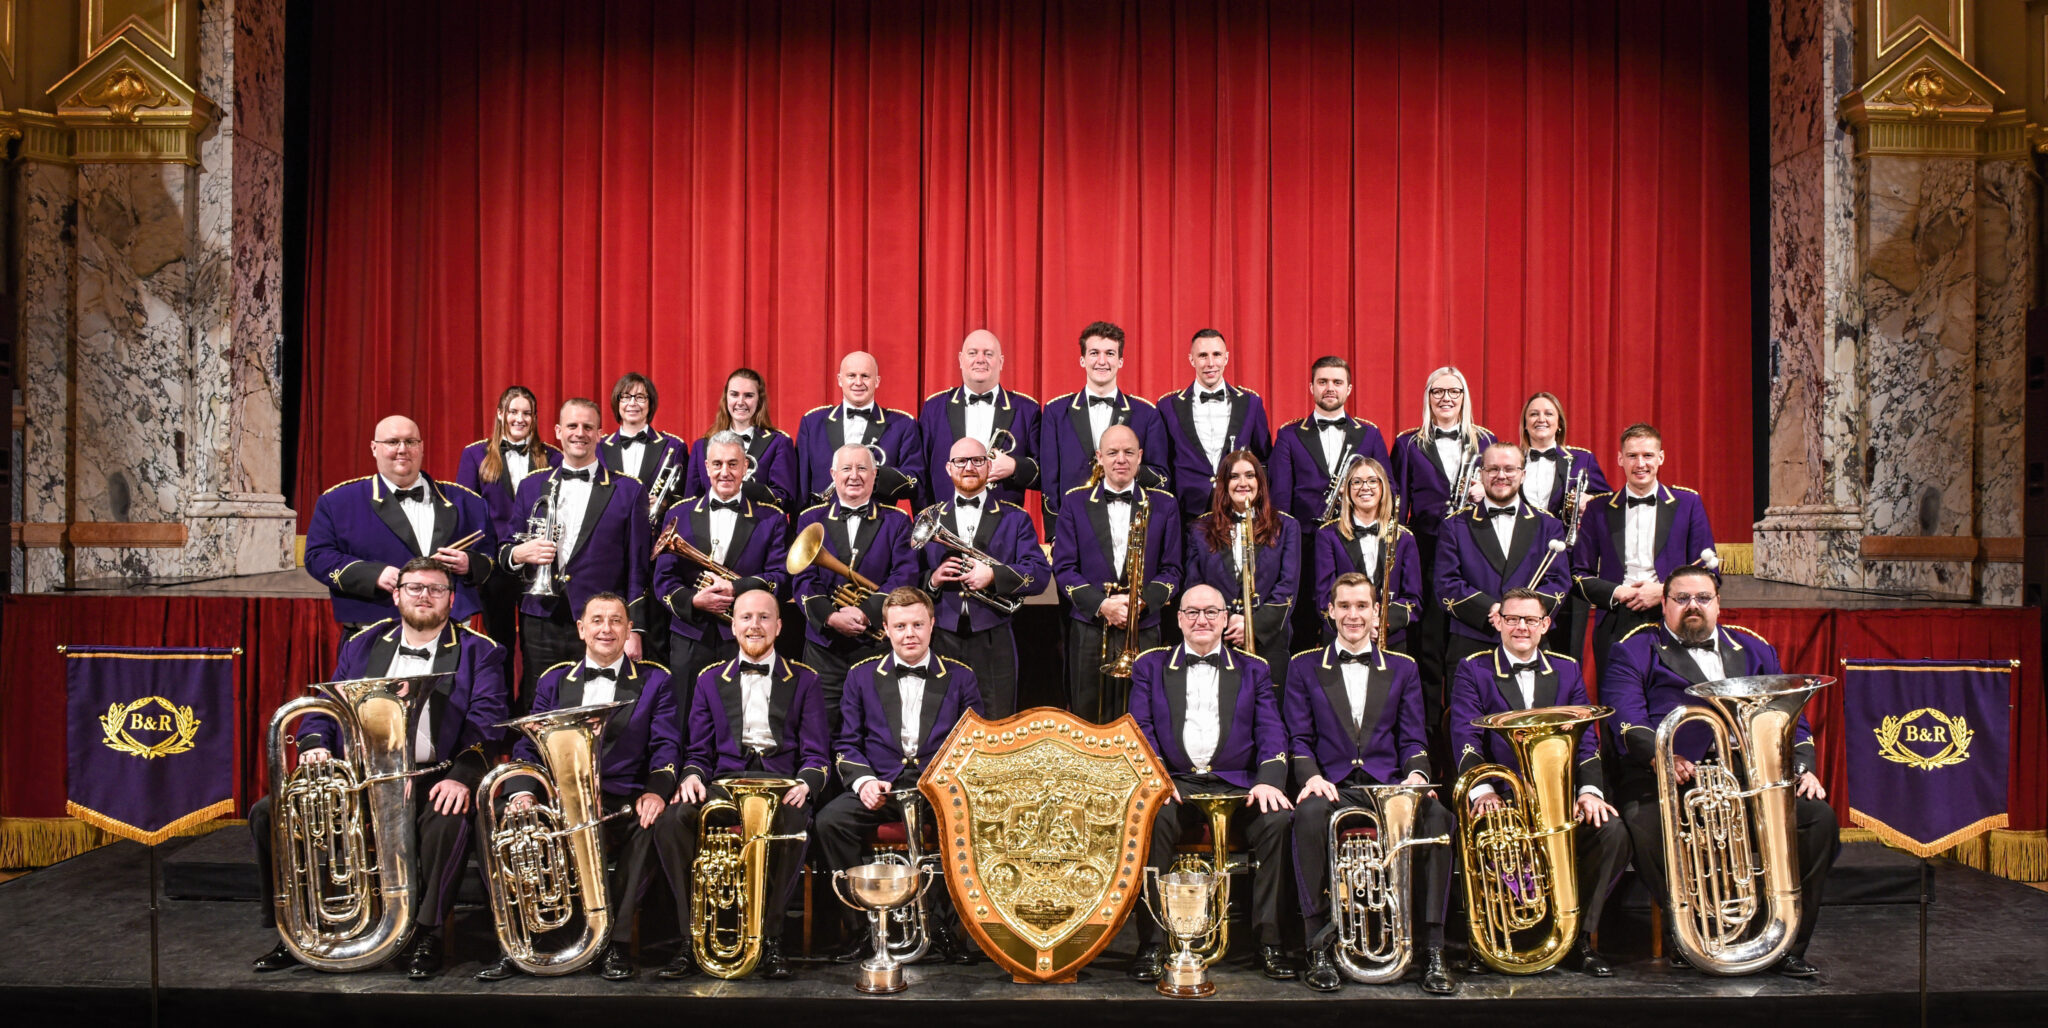 Brighouse and Rastrick Band - RNCM International Brass Band Festival -  Royal Northern College of Music